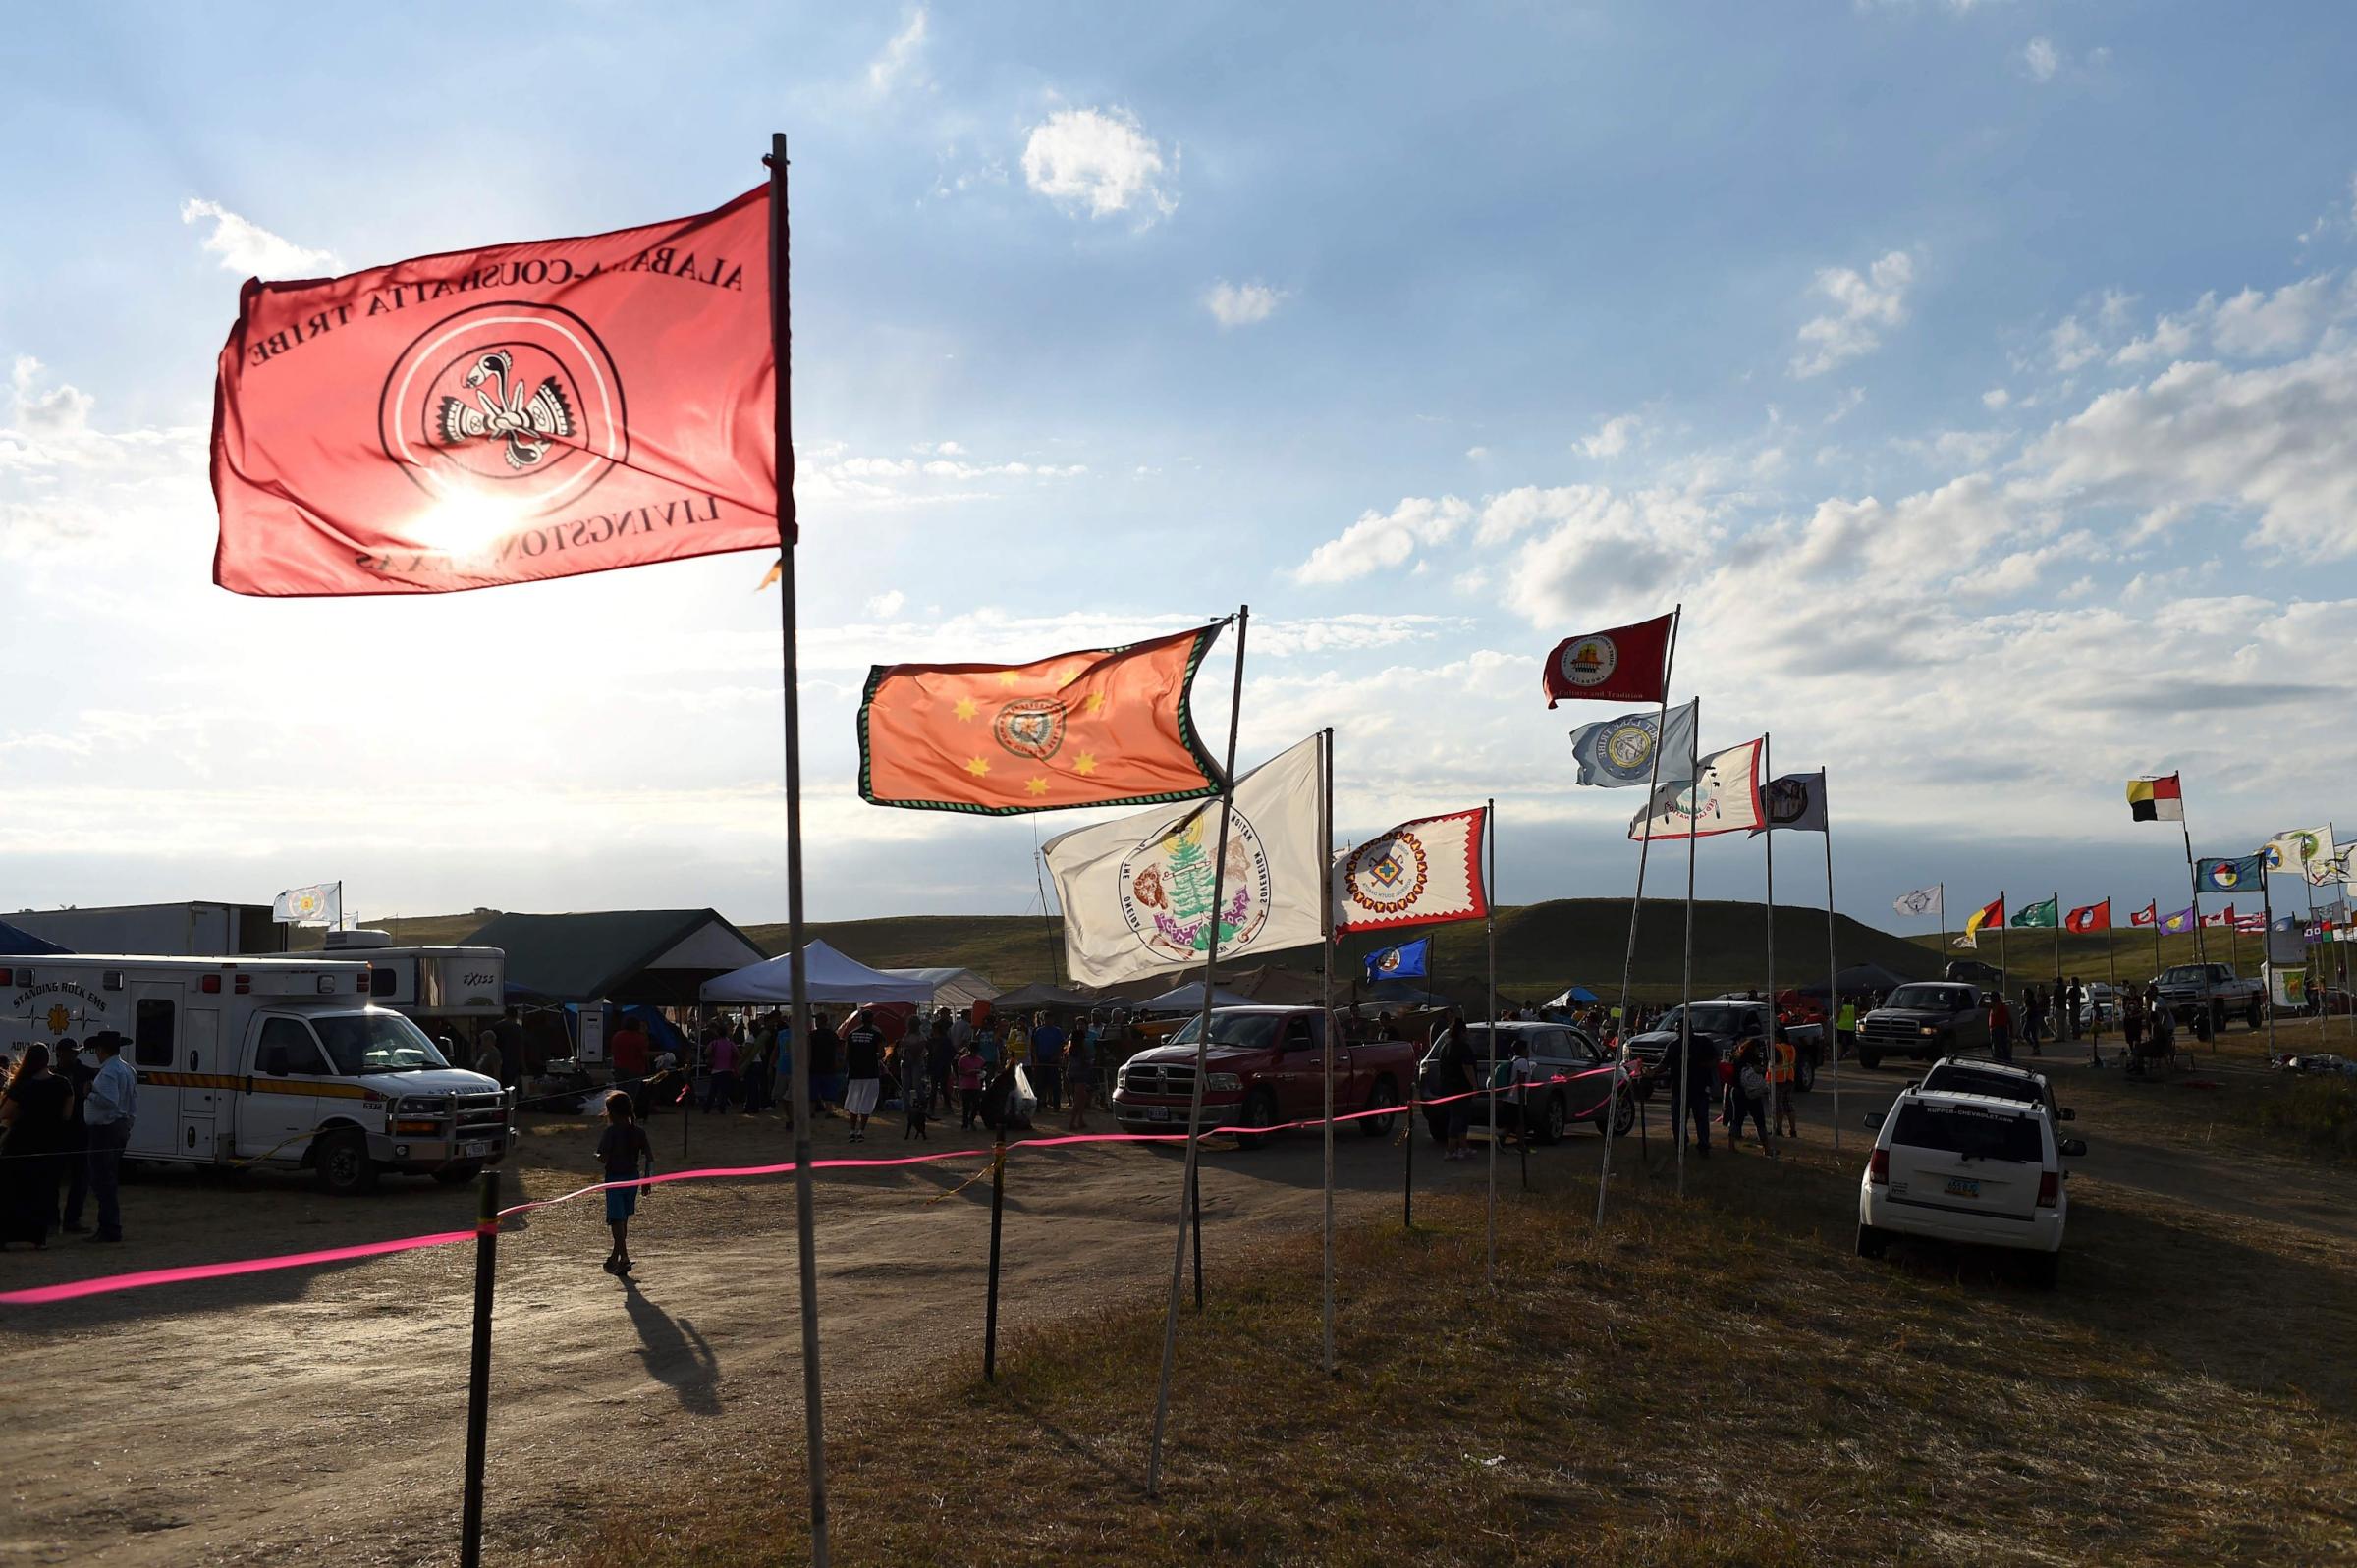 Flags of Native American tribes from across the US and Canada line the entrance to a protest encampment near Cannon Ball, North Dakota on Sept. 3, 2016.